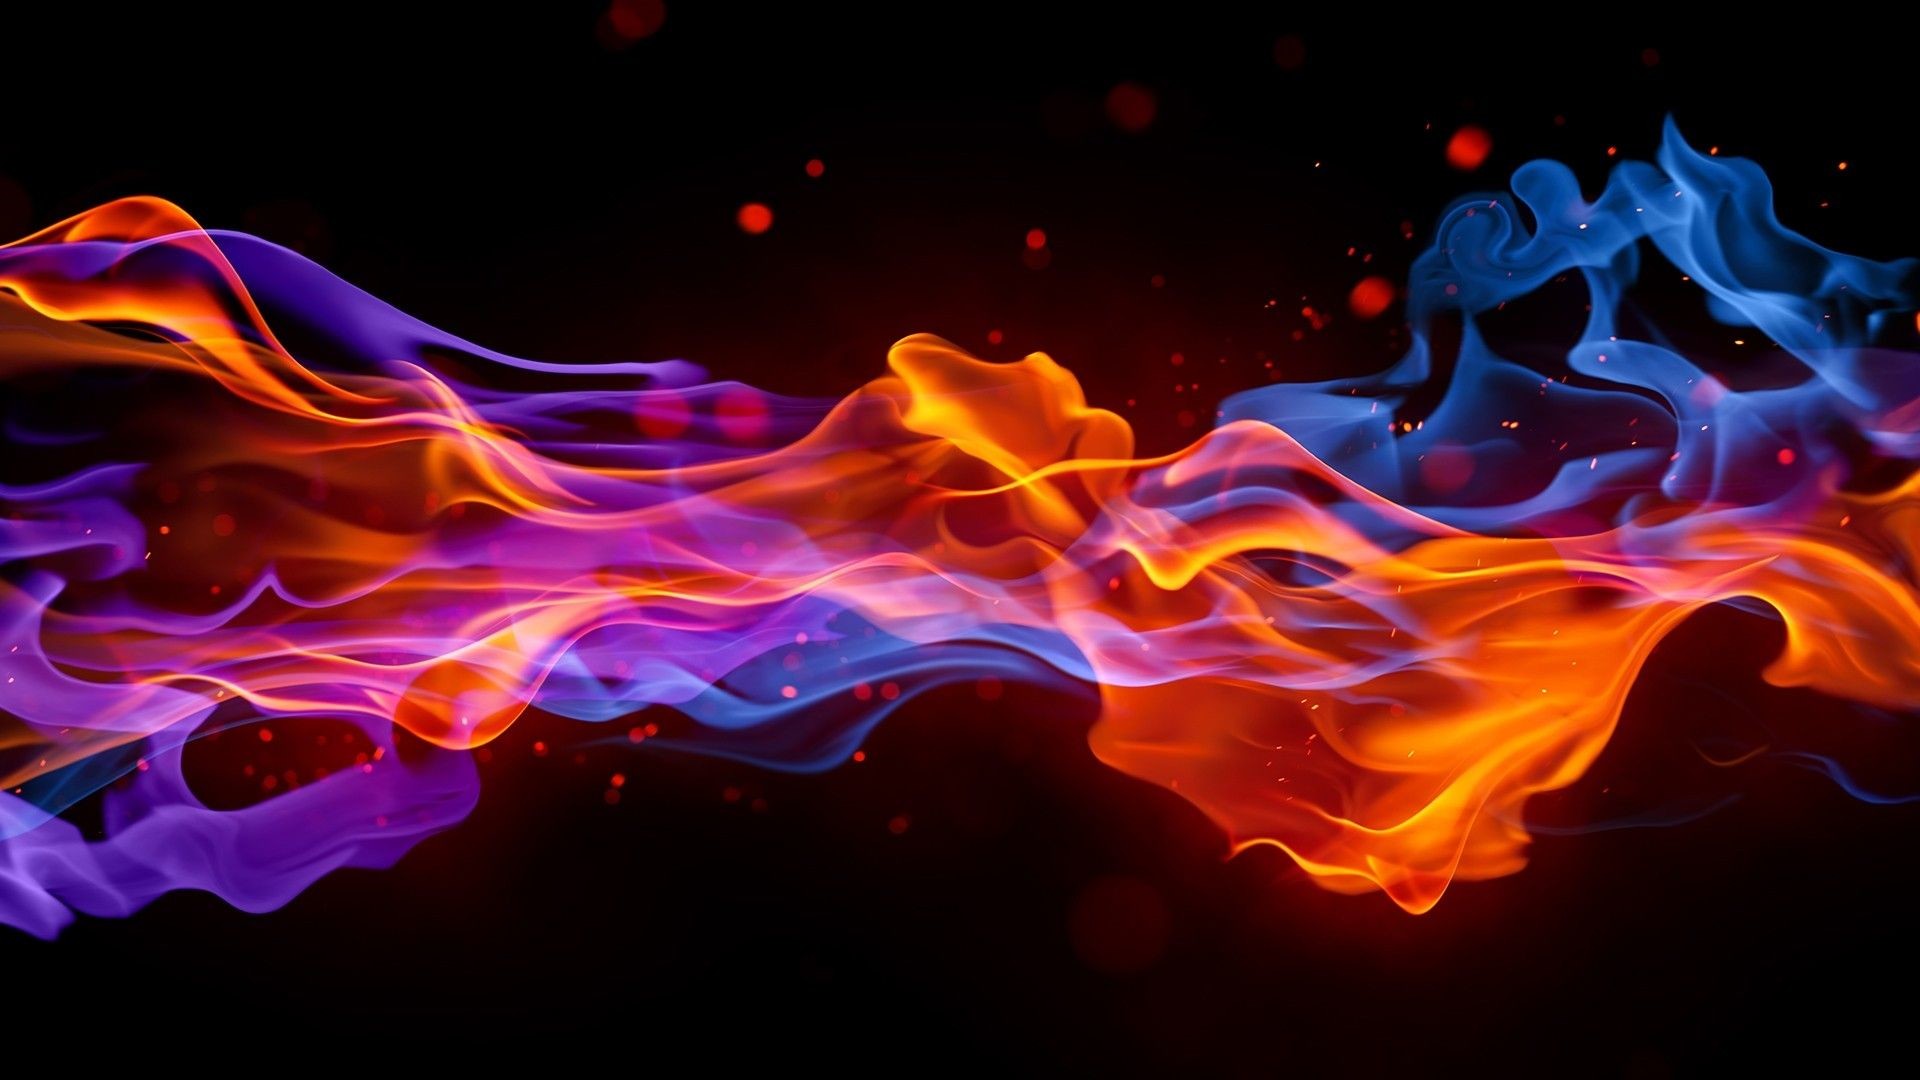 1920x1080 Fire and Flames Backgrounds and Codes for any Blog, web page 1300Ã960  Flaming